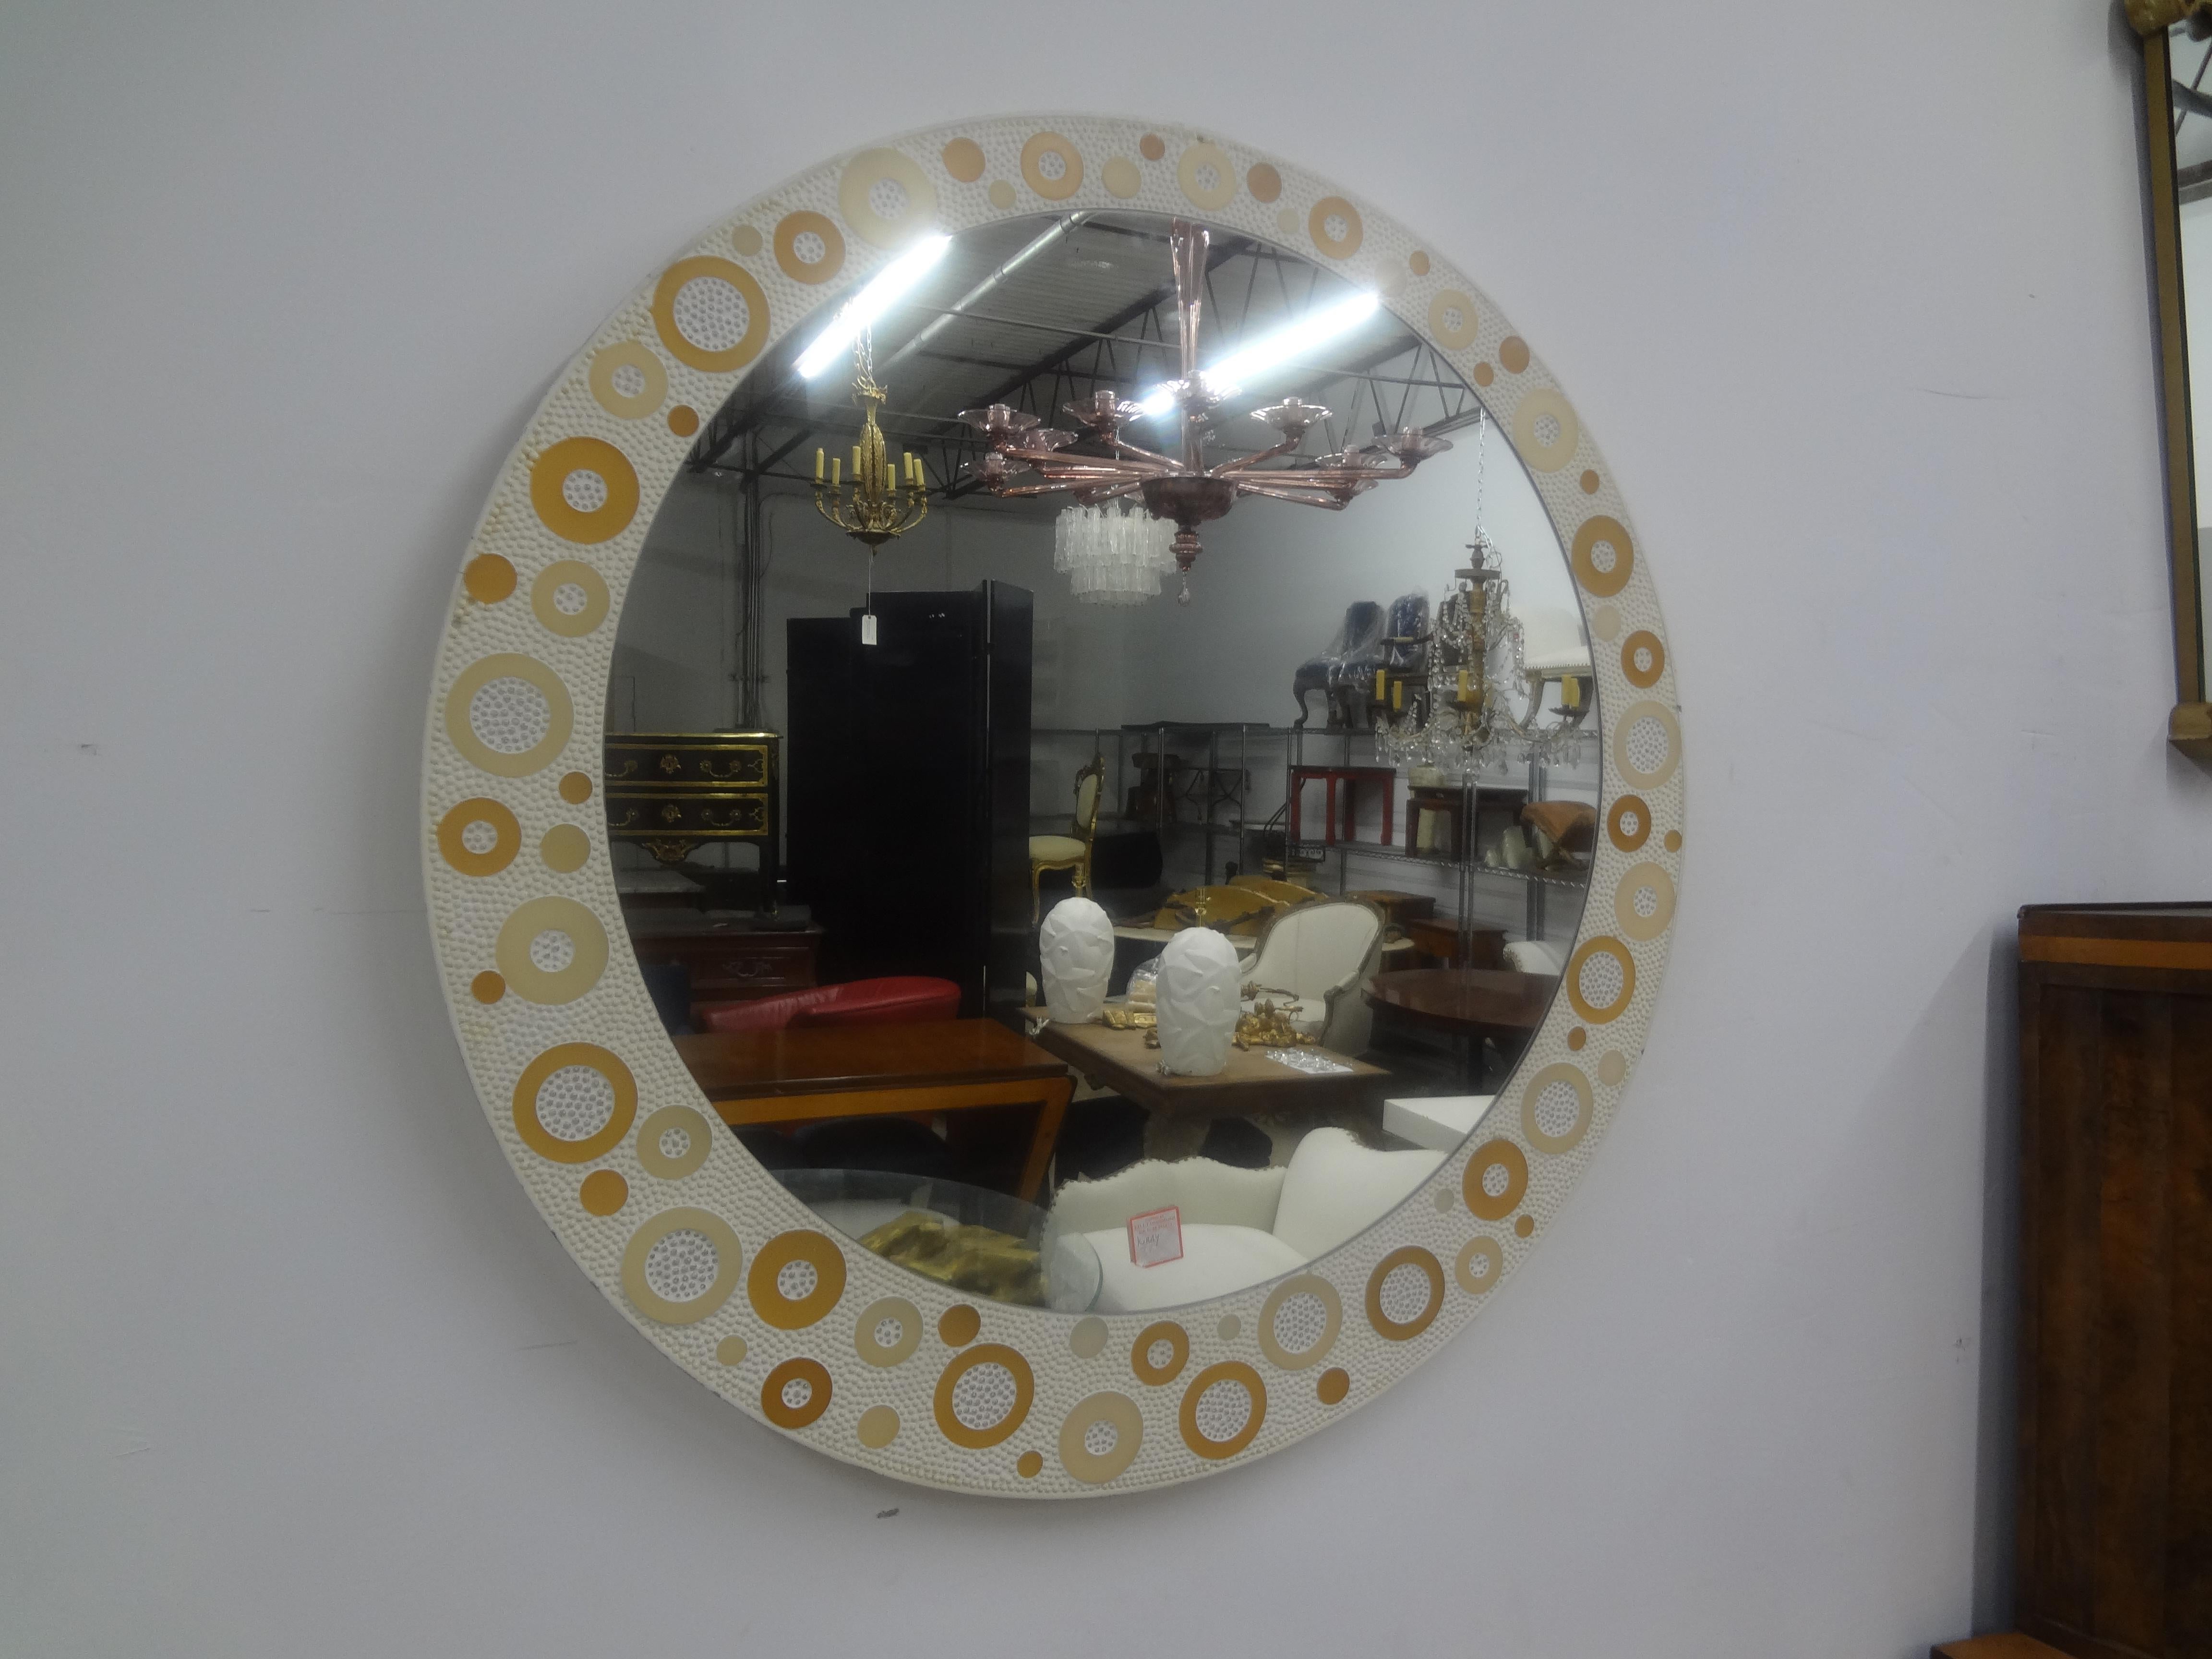 Italian Mid Century Modern Mirror.
This unusual large round Italian mirror (39.5 Inches)  has a cream background with an interesting design of alternating circles in neutral tones.
Great Italian modernist design!